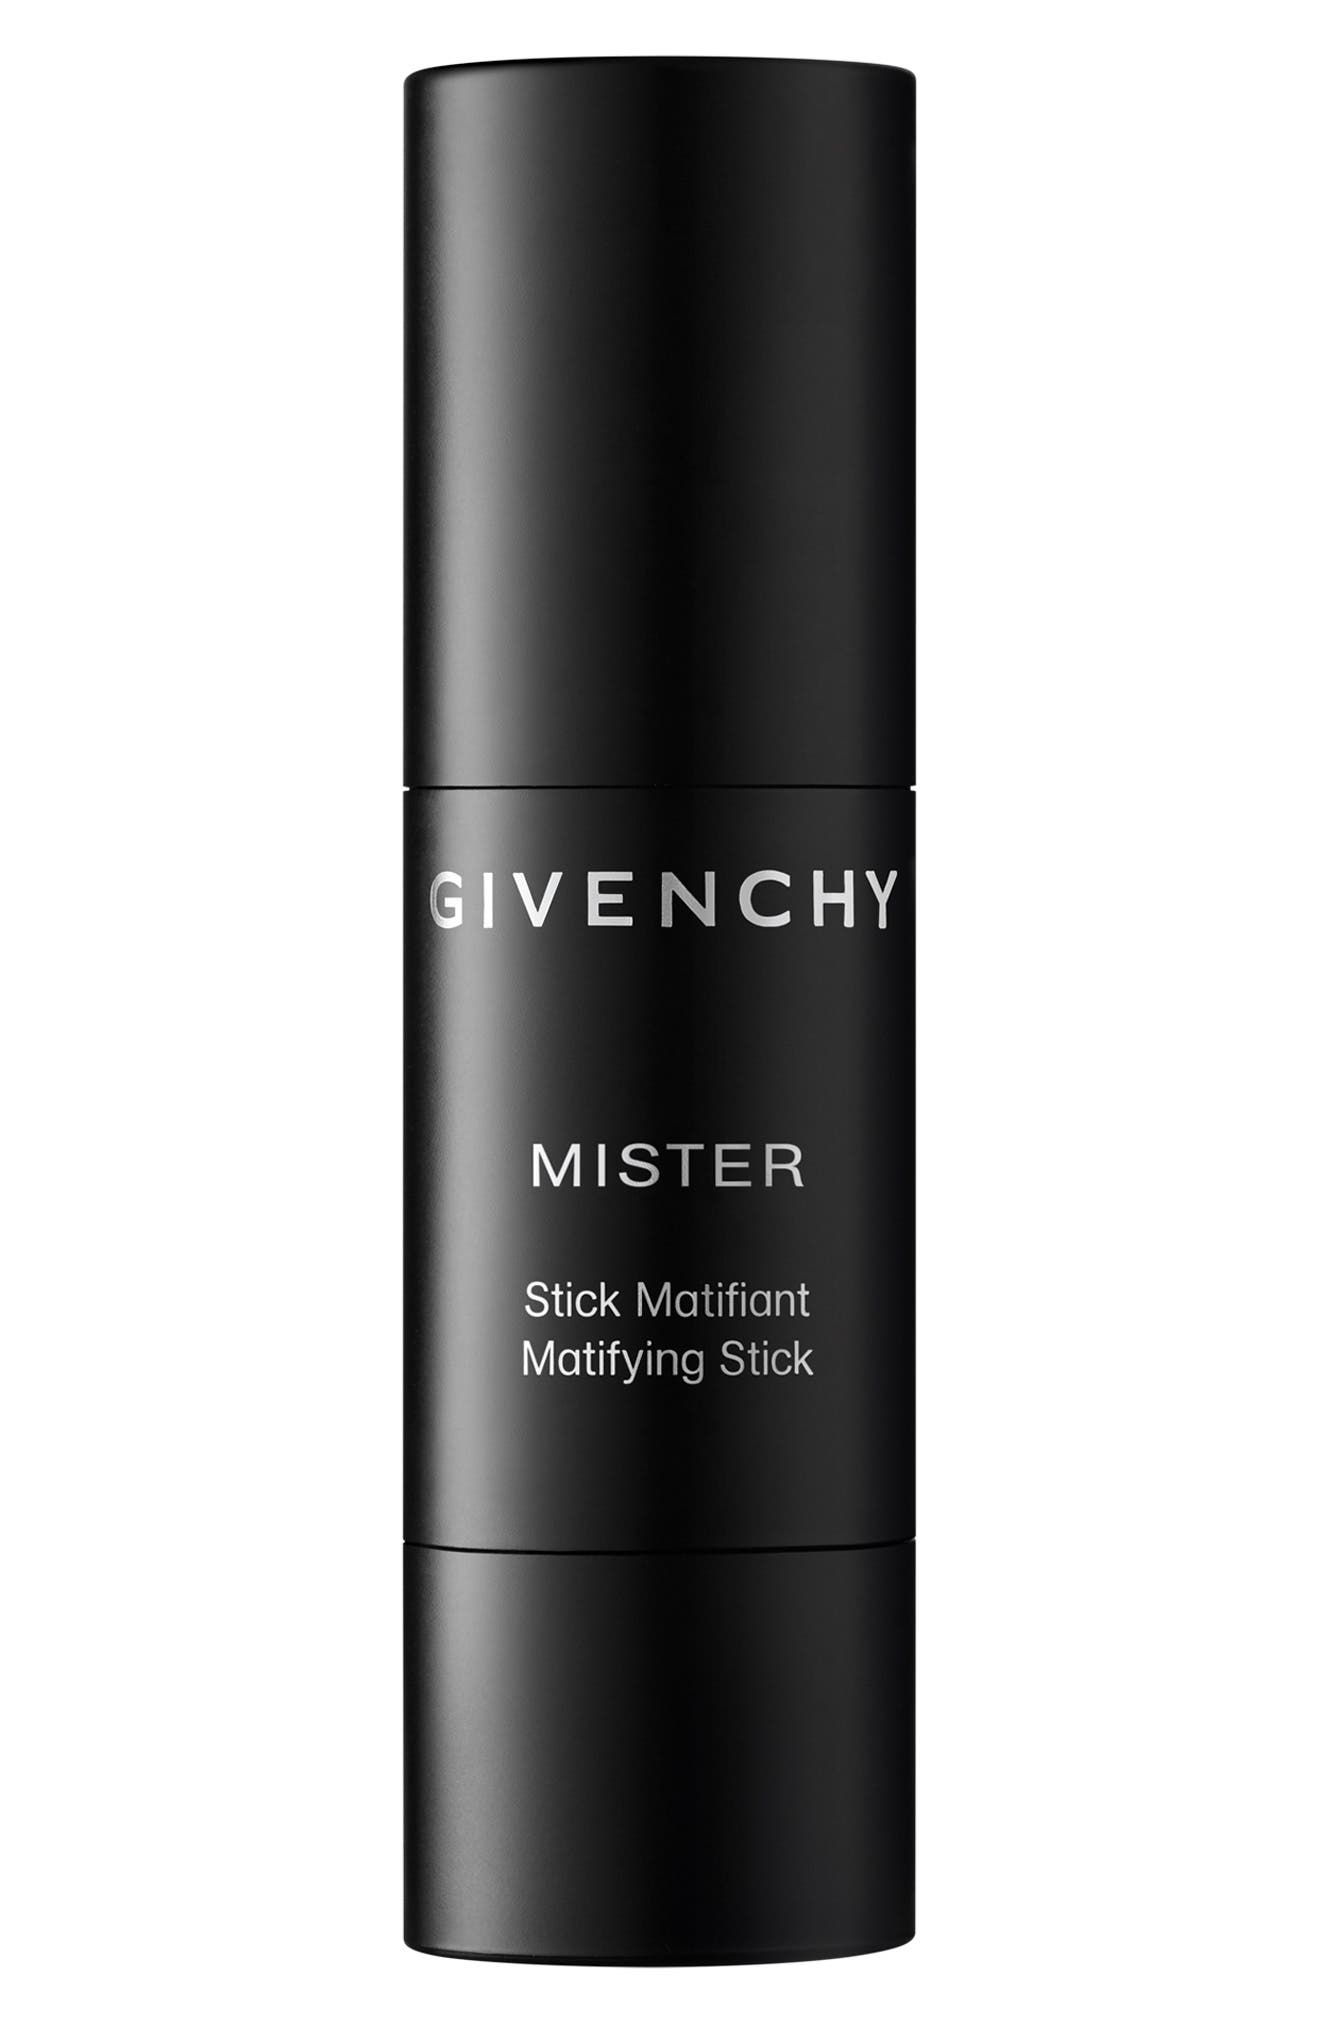 givenchy usa shop online